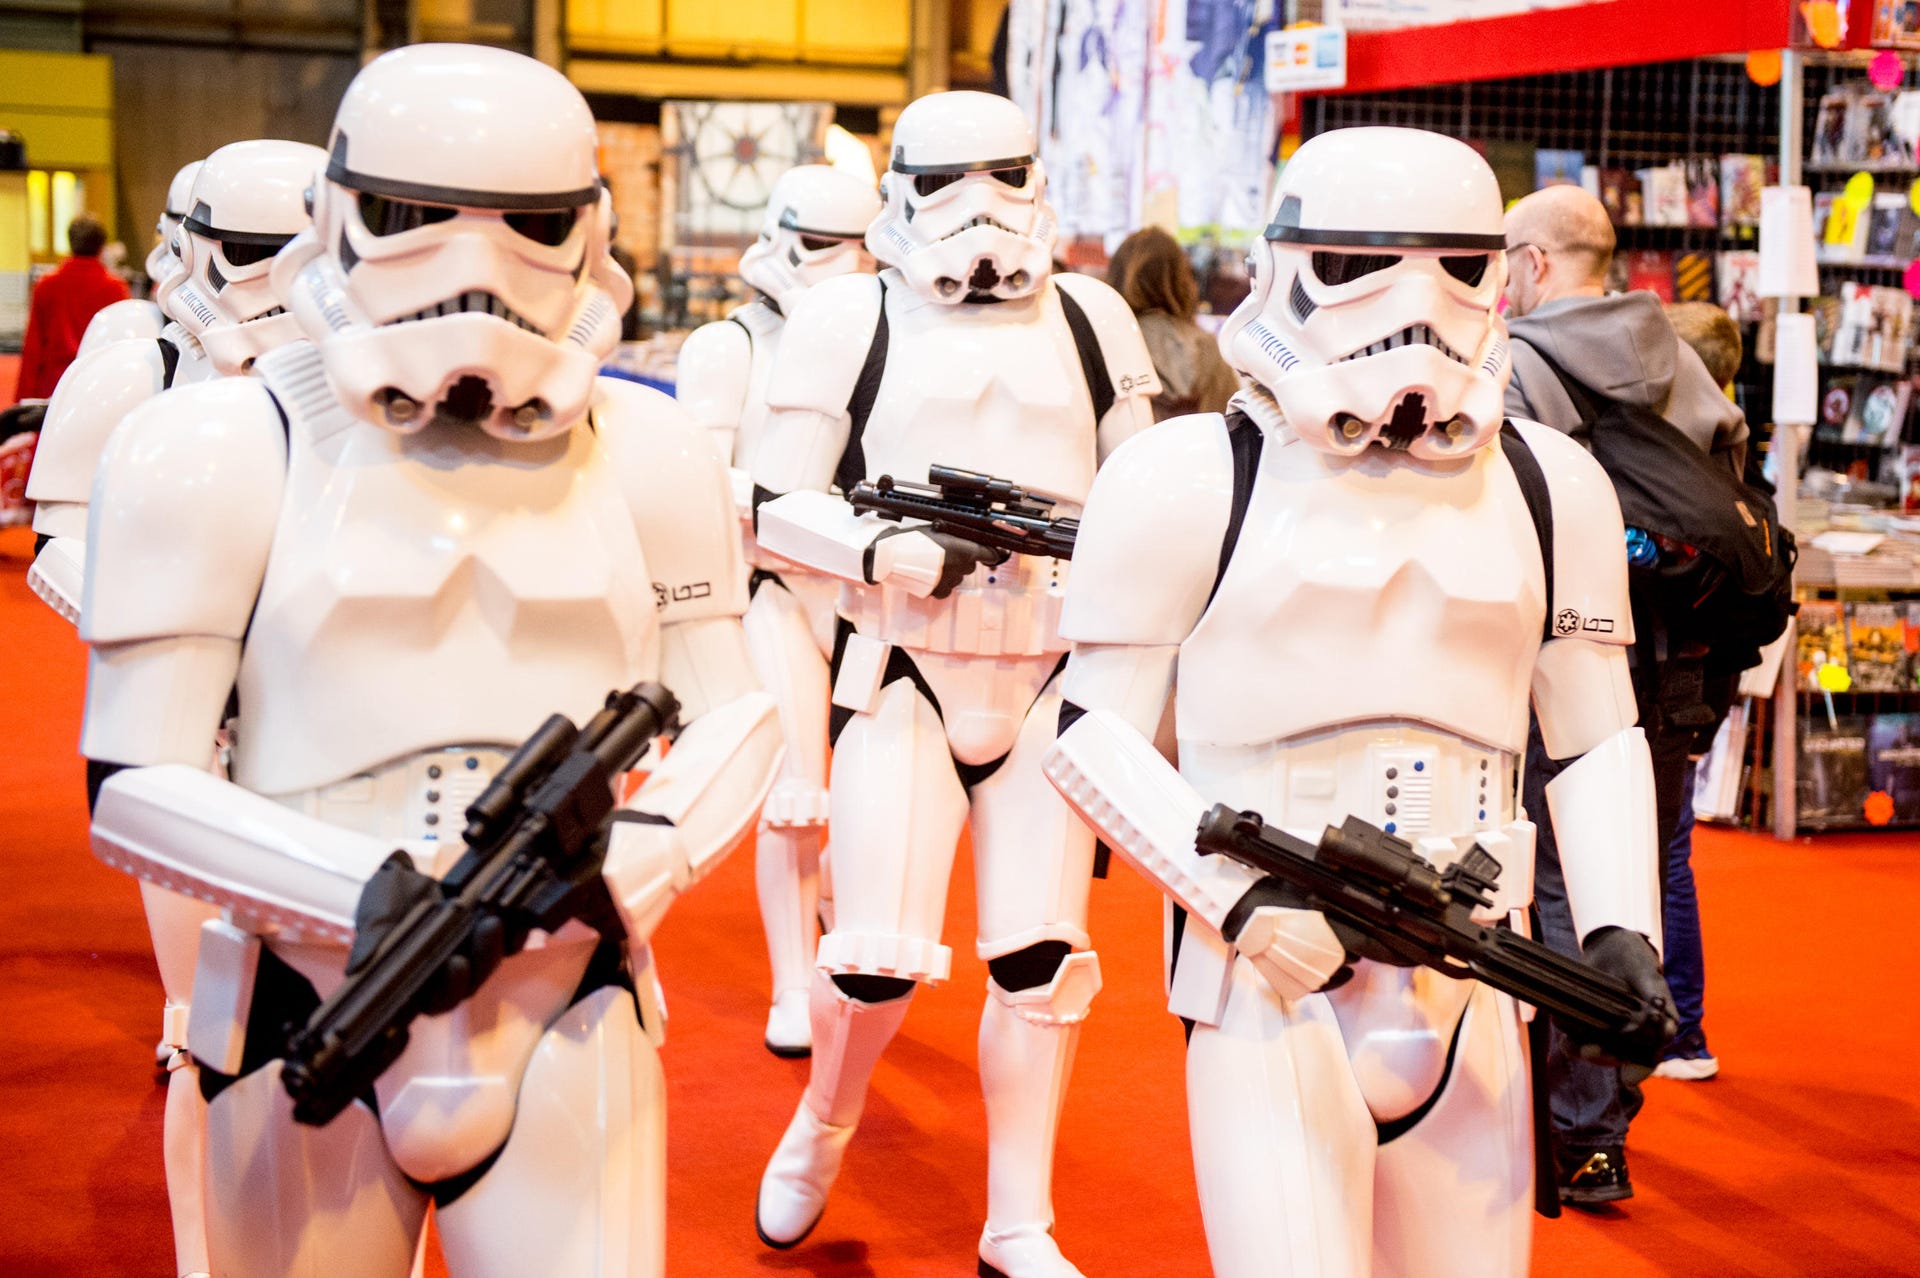 Stormtroopers from Star Wars